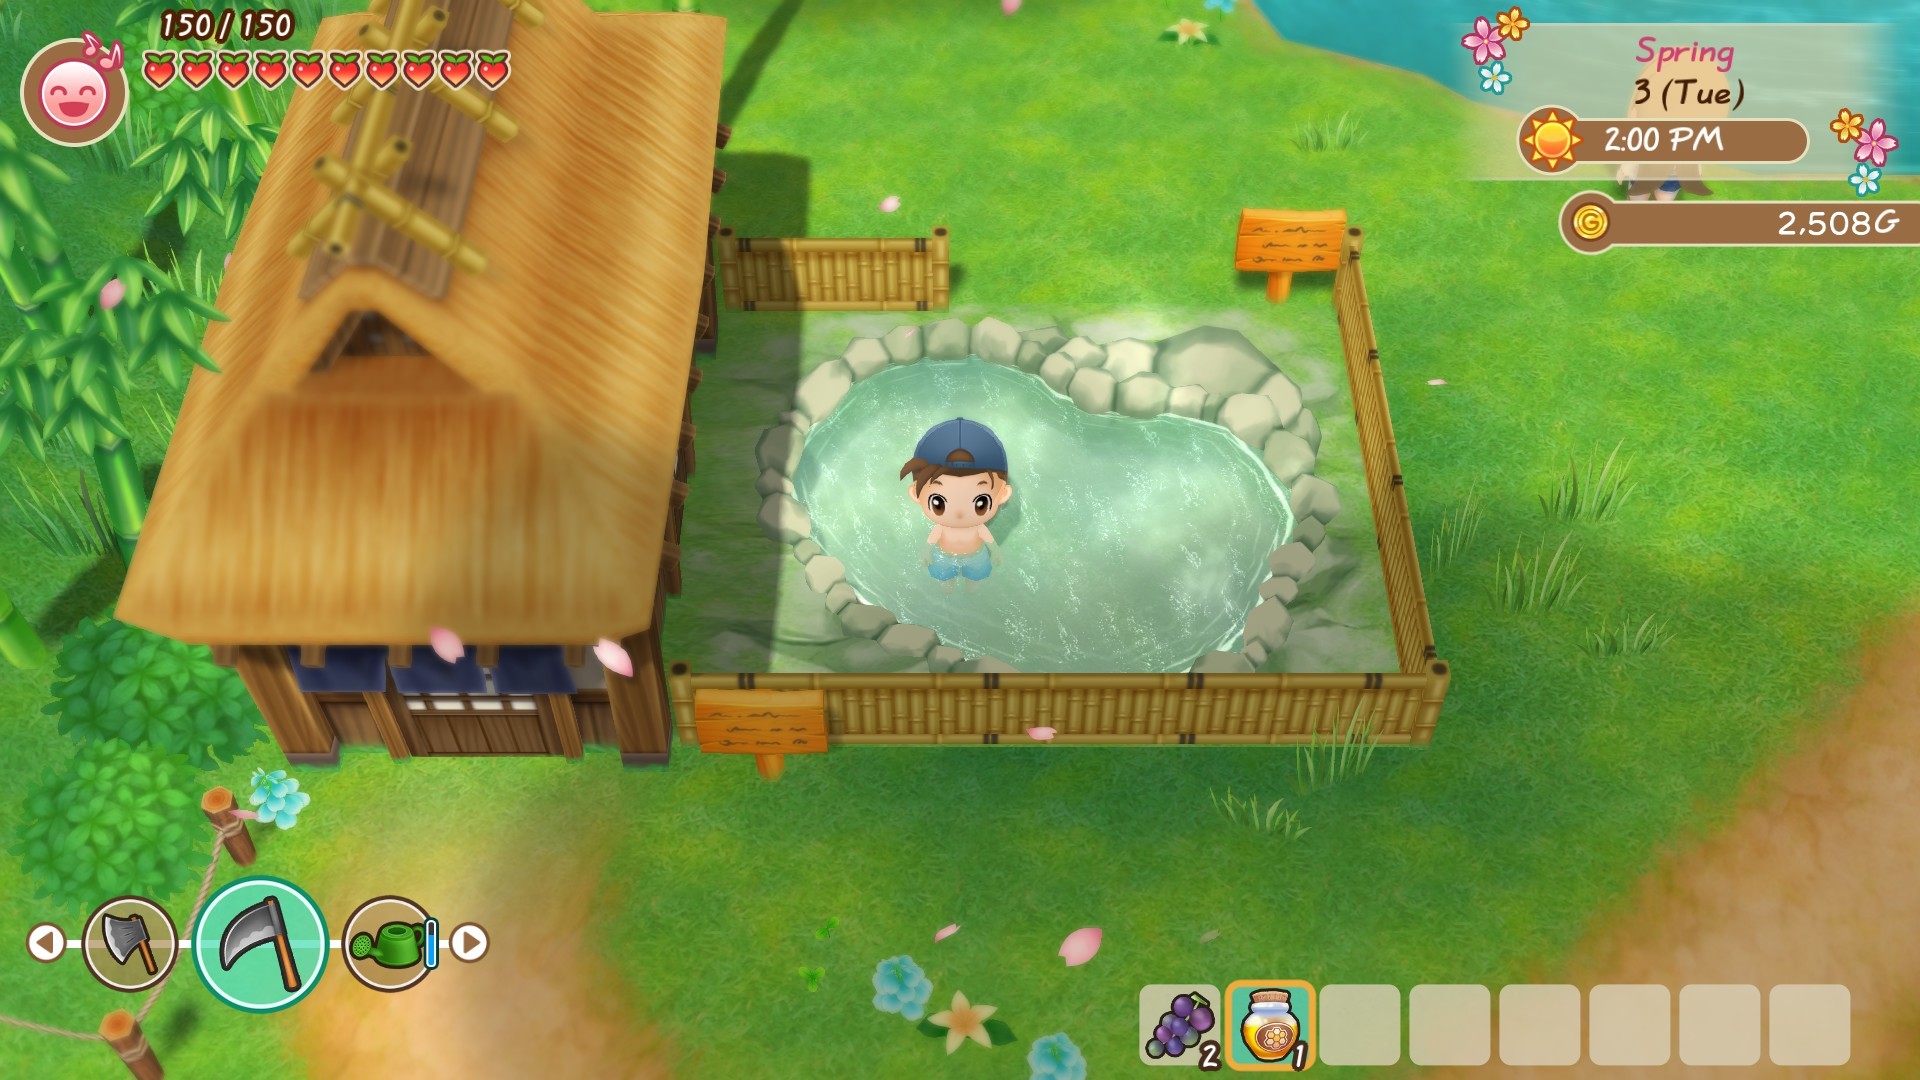 STORY OF SEASONS: Friends of Mineral Town on Steam